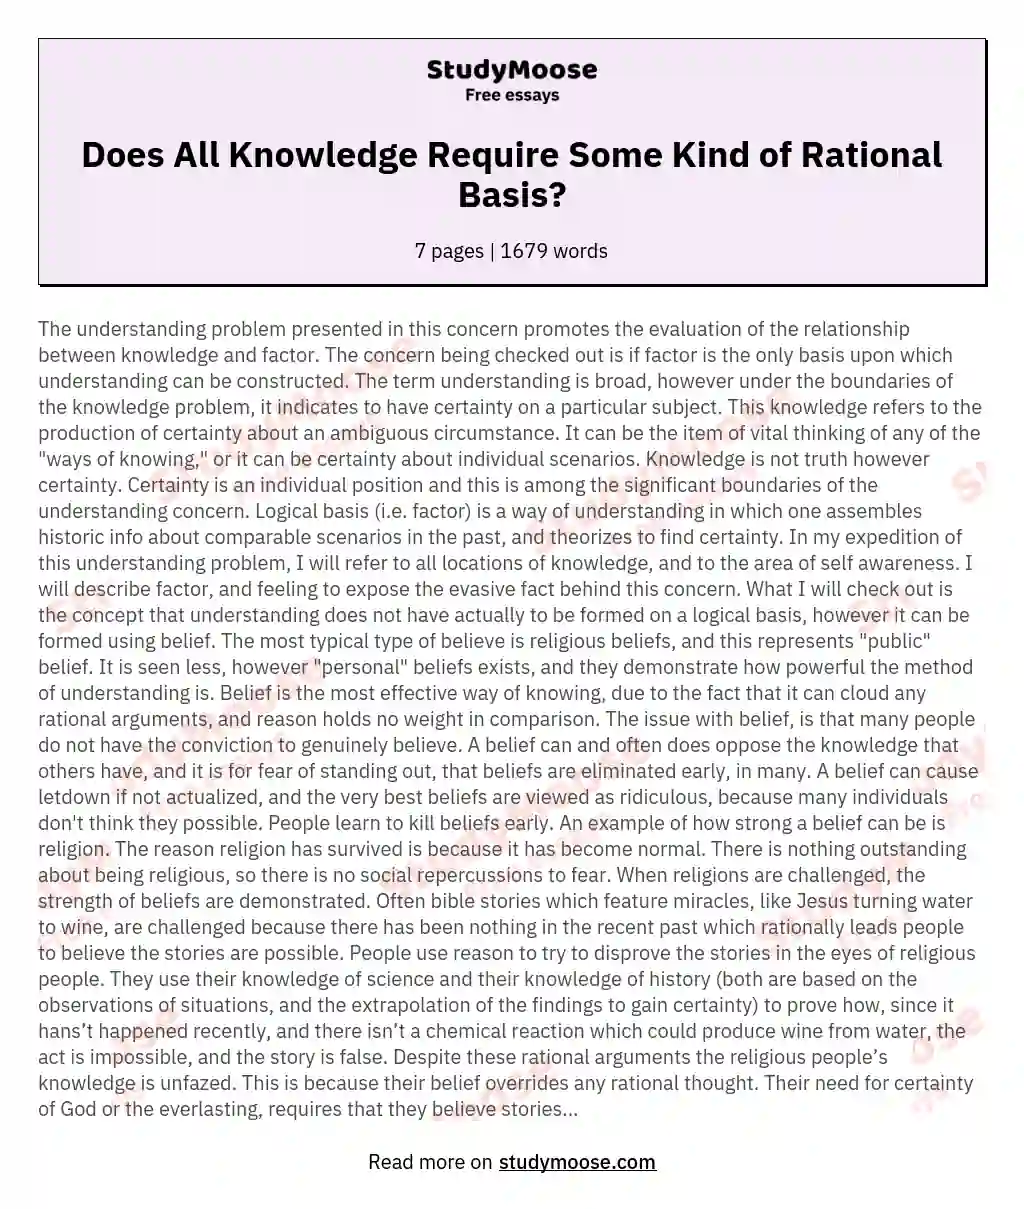 Does All Knowledge Require Some Kind of Rational Basis?